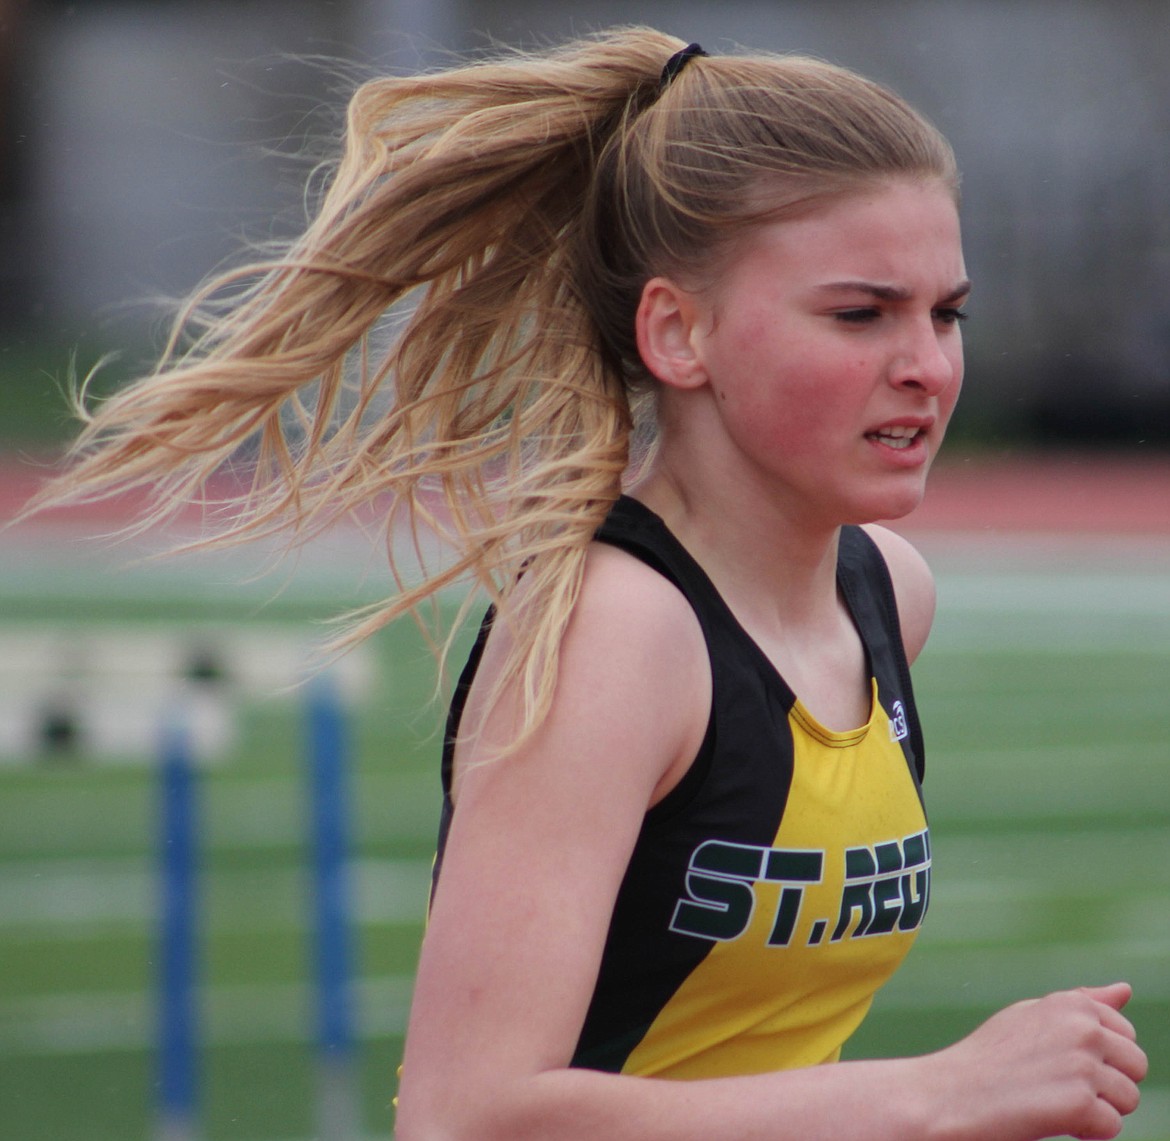 SUNNY SHOUPE of St. Regis runs the 200-meter dash at the Seeley-Swan Invite at Big Sky High School in Missoula on Saturday, April 20.